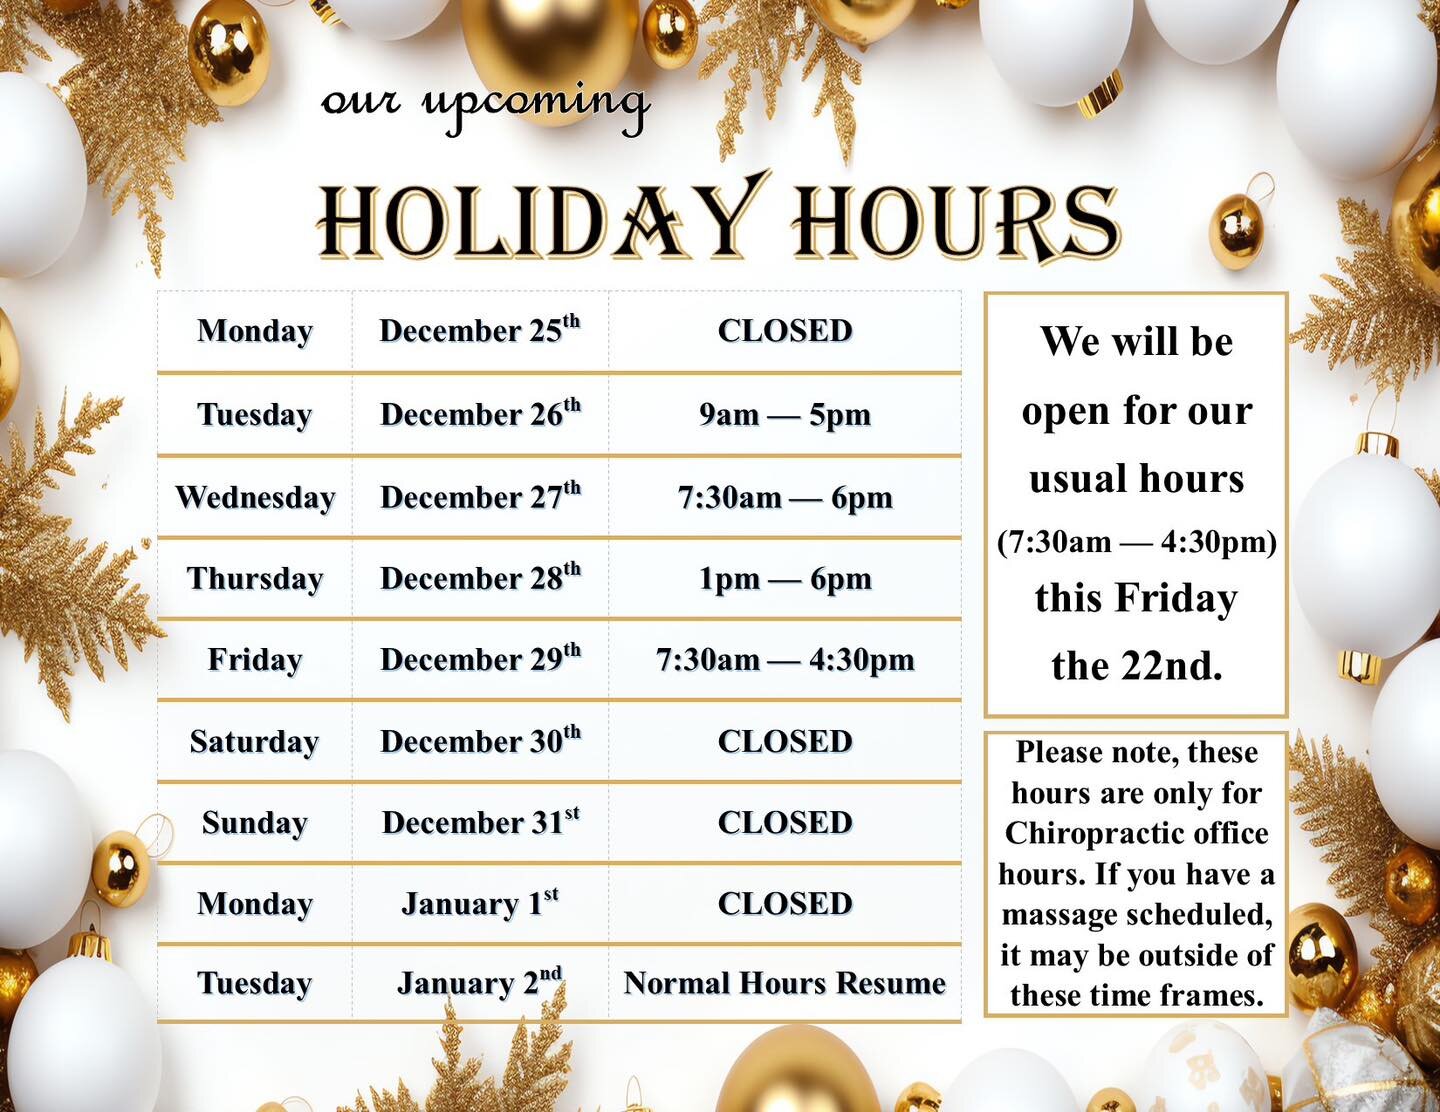 Here are the clinic hours for the next couple of weeks. Have a Happy Holidays from all of us at River Valley Chiropractic!

#rivervalleychiropractic #onalaskachiropractic #onalaskawi #lacrossewisconsin